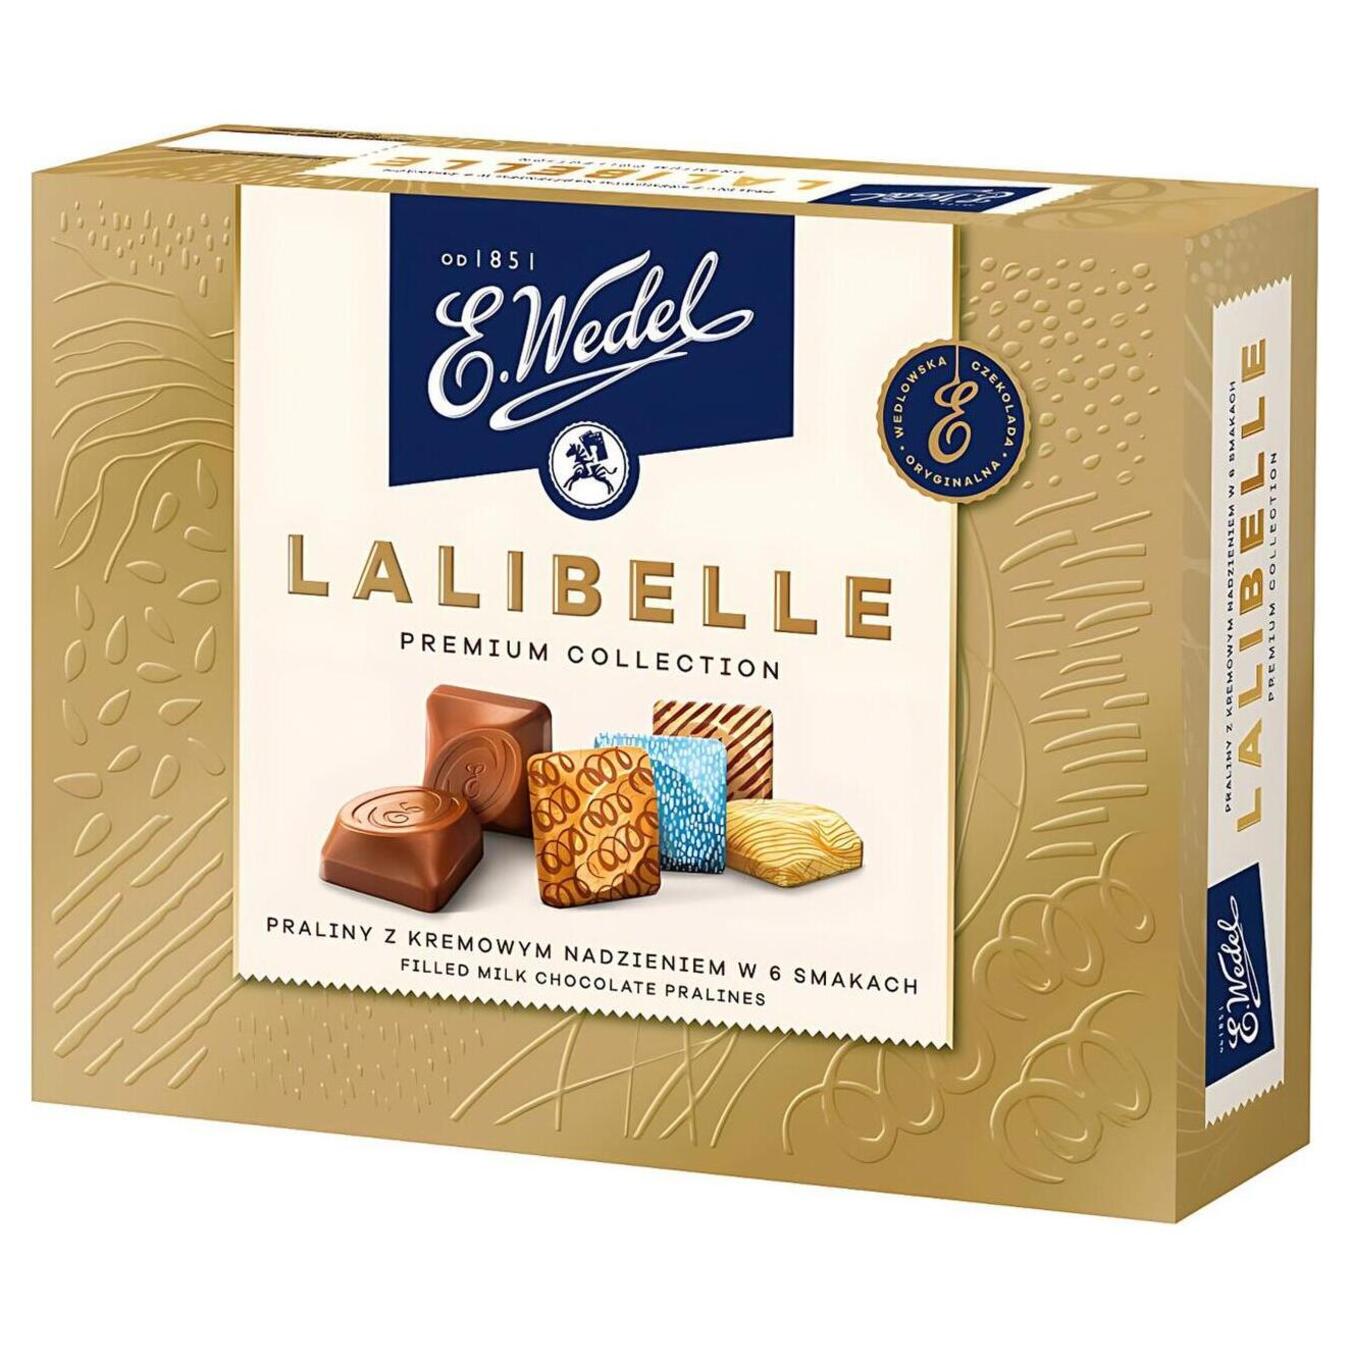 Wedel candies in a chocolate box with 6 fillers 238g